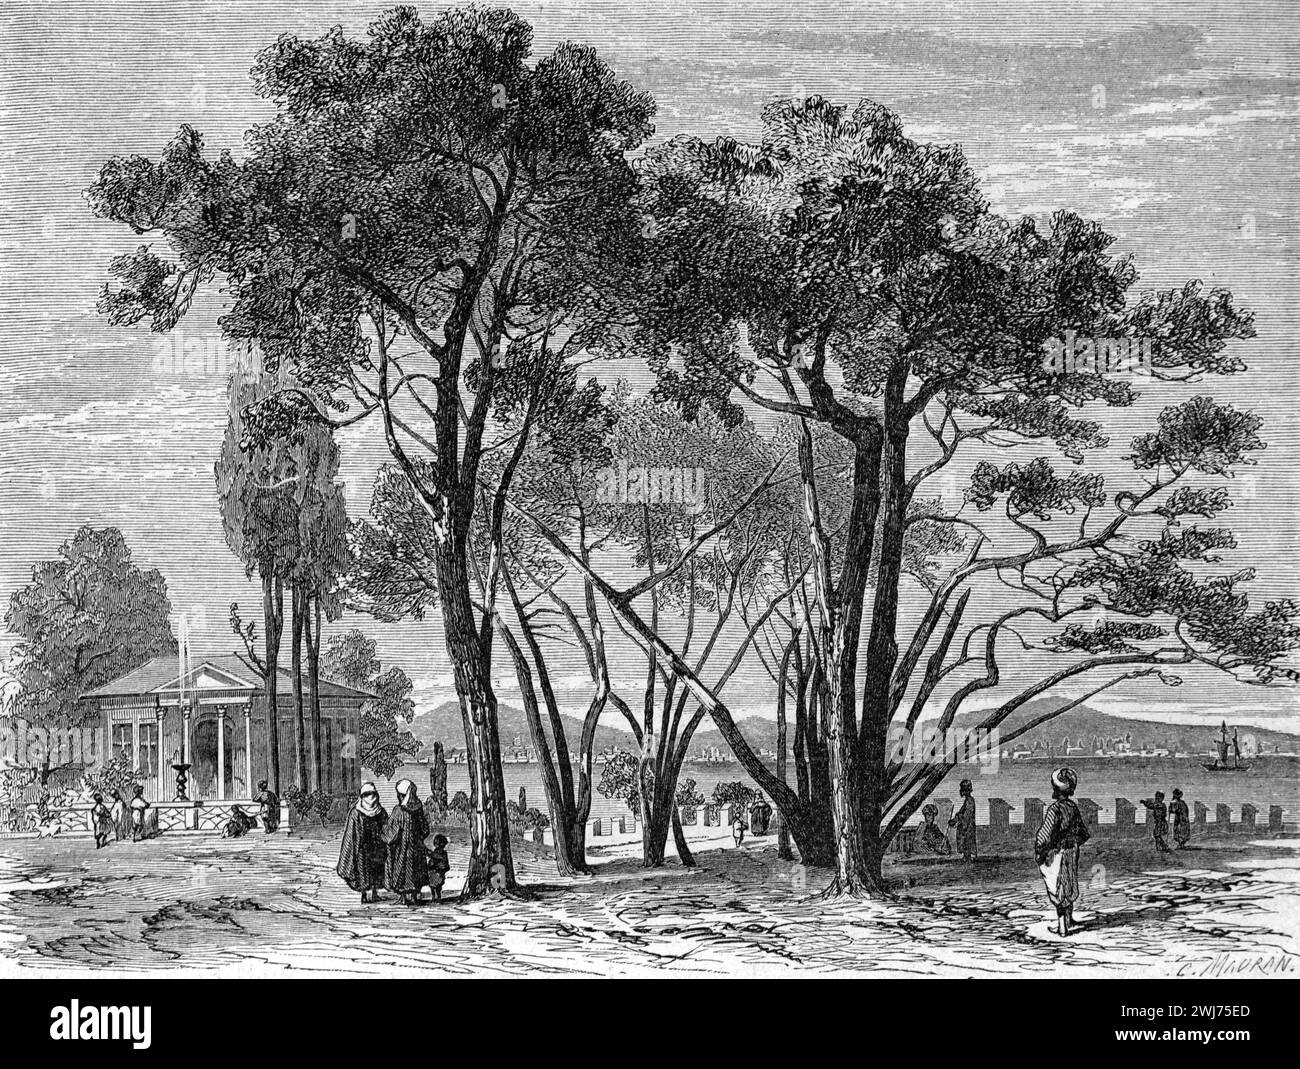 Gardens at Topkapi Palace with View over the Golden Horn and the Bosphorus Straits or Bosporus Strait at Seraglio Point or Sarayburnu, Istanbul Turkey. Vintage or Historic Engraving or Illustration 1863 Stock Photo